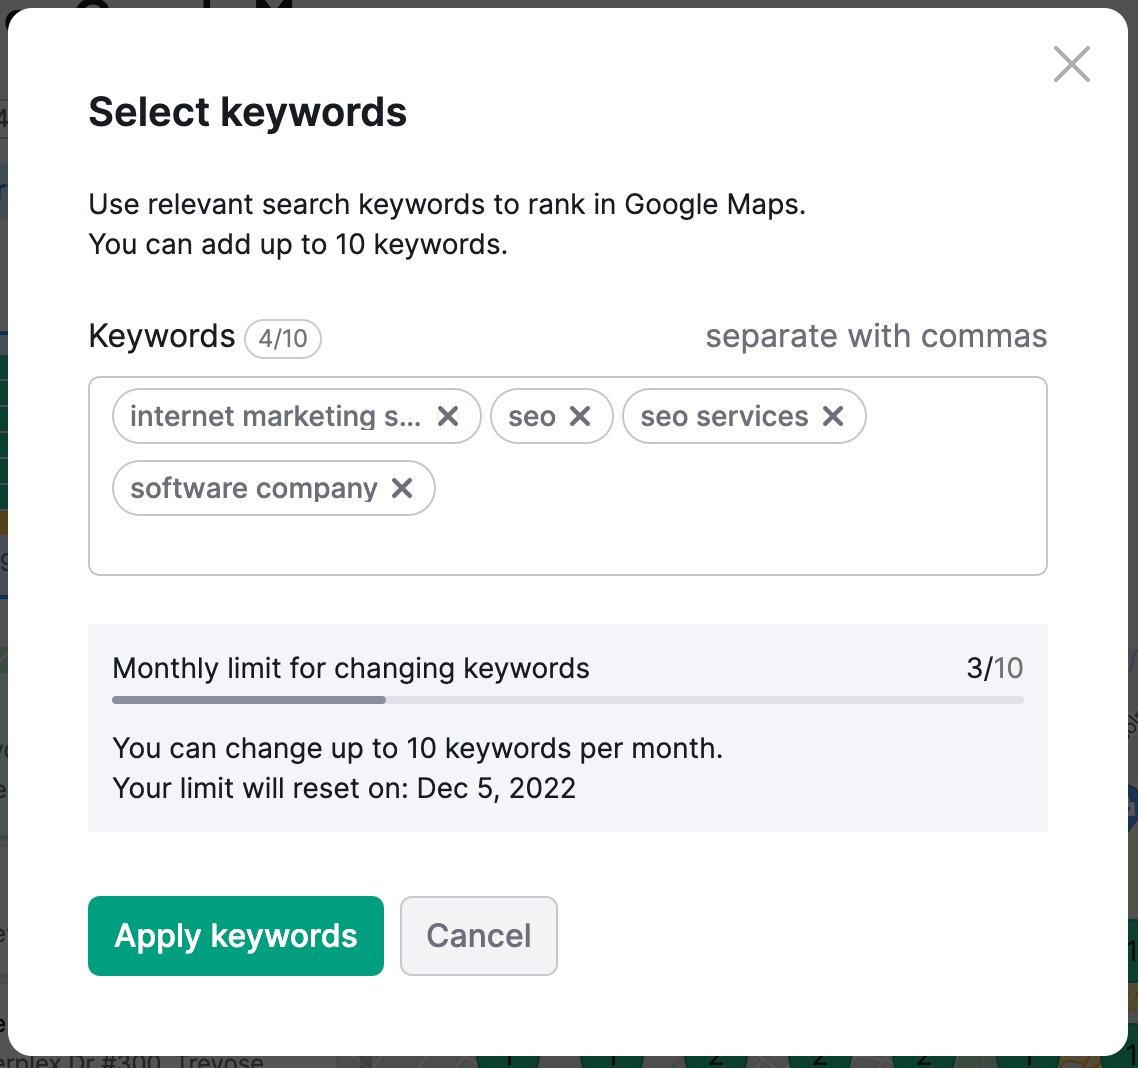 Use relevant search keywords to rank in Google Maps 